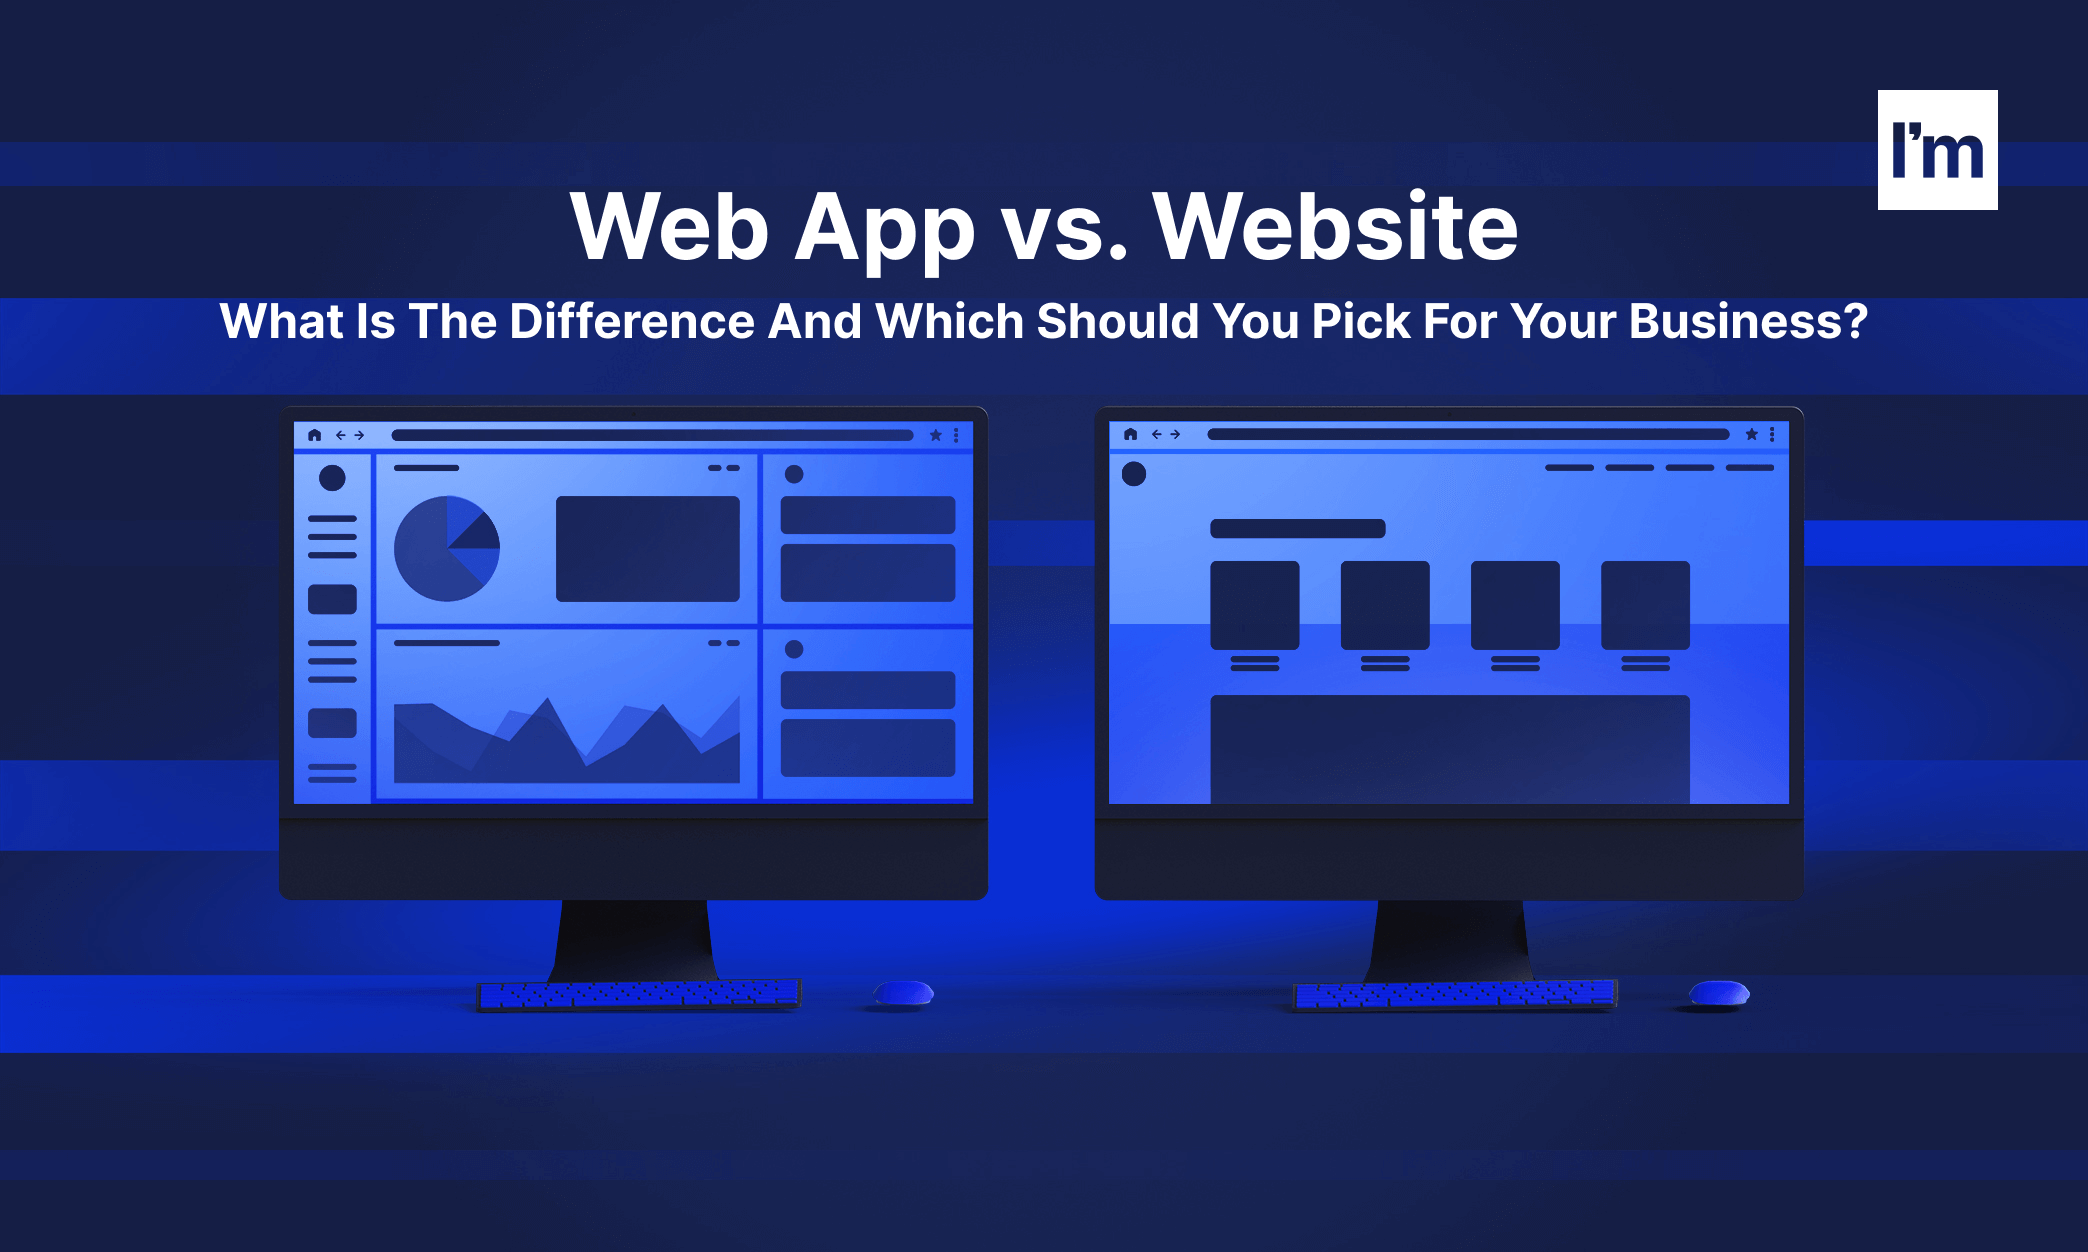 Difference between Website & Web Application - Which Will Suit You Better?